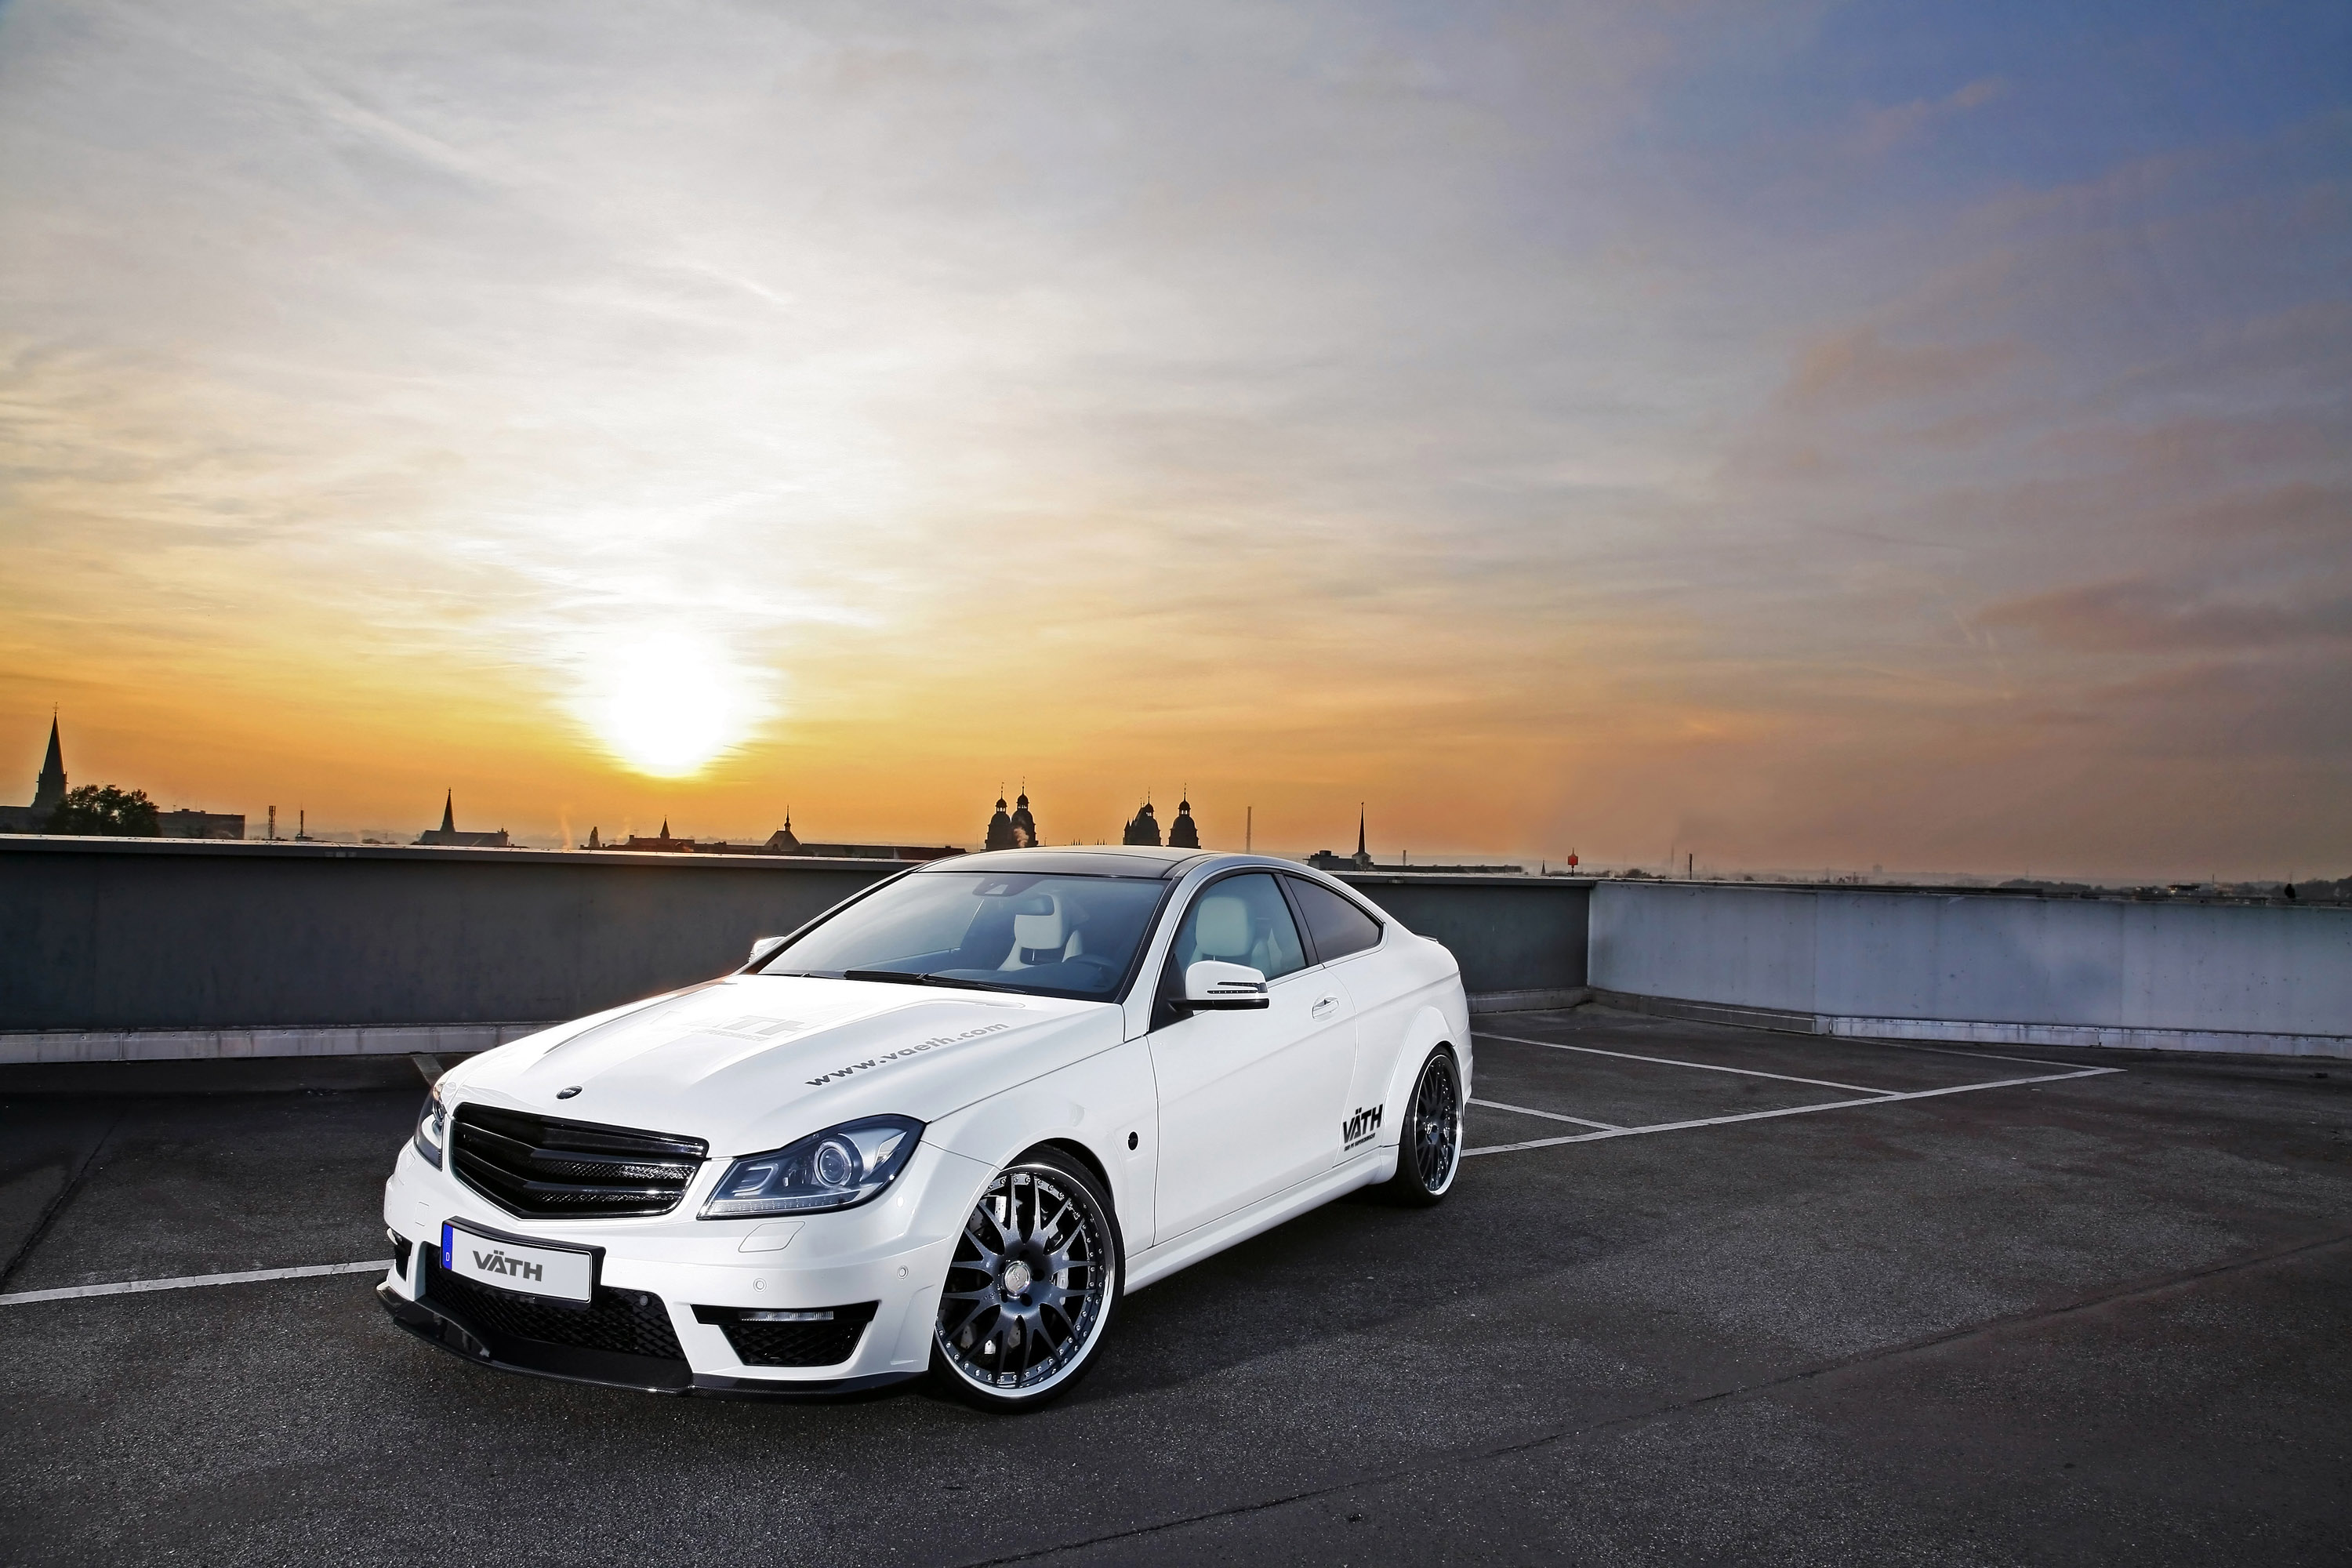 2011, Vath, Mercedes, Benz, V63, Supercharged, Tuning Wallpaper